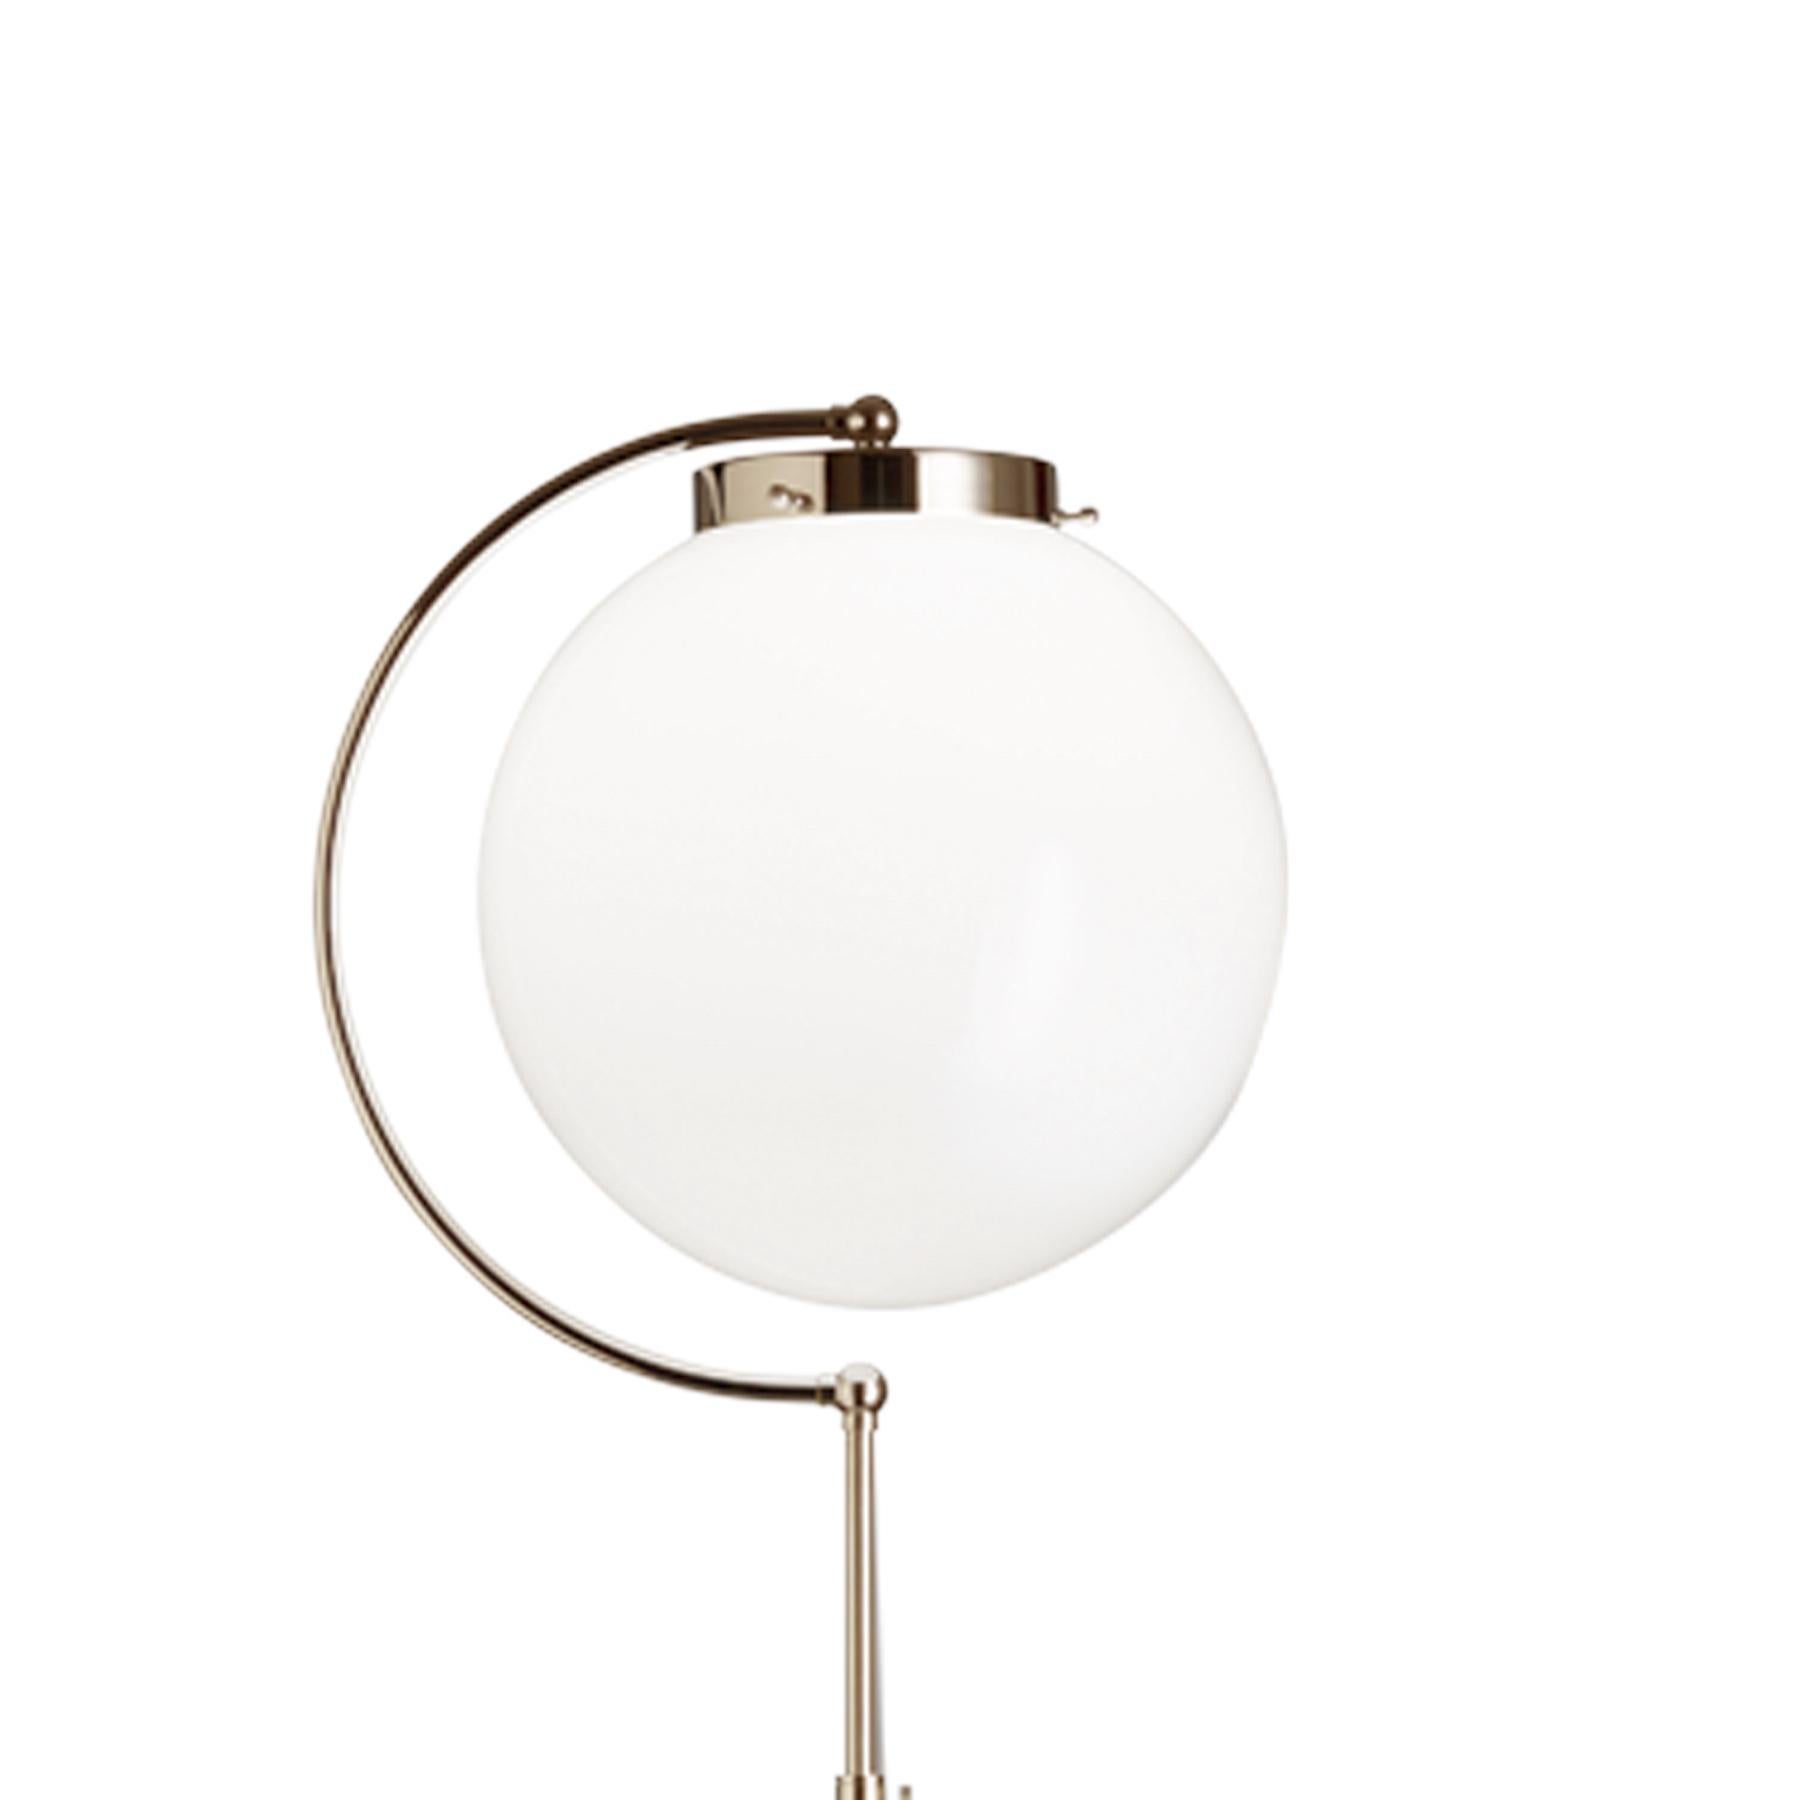 Bauhaus floor lamp DSL 23. Originally designed in 1923 by Richard Döcker. Current production manufactured in Germany by Tecnolumen. Nickel, opaline glass. Rewired for U.S. standards. Adjustable height. This floor lamp from 1923 is a clear reflection